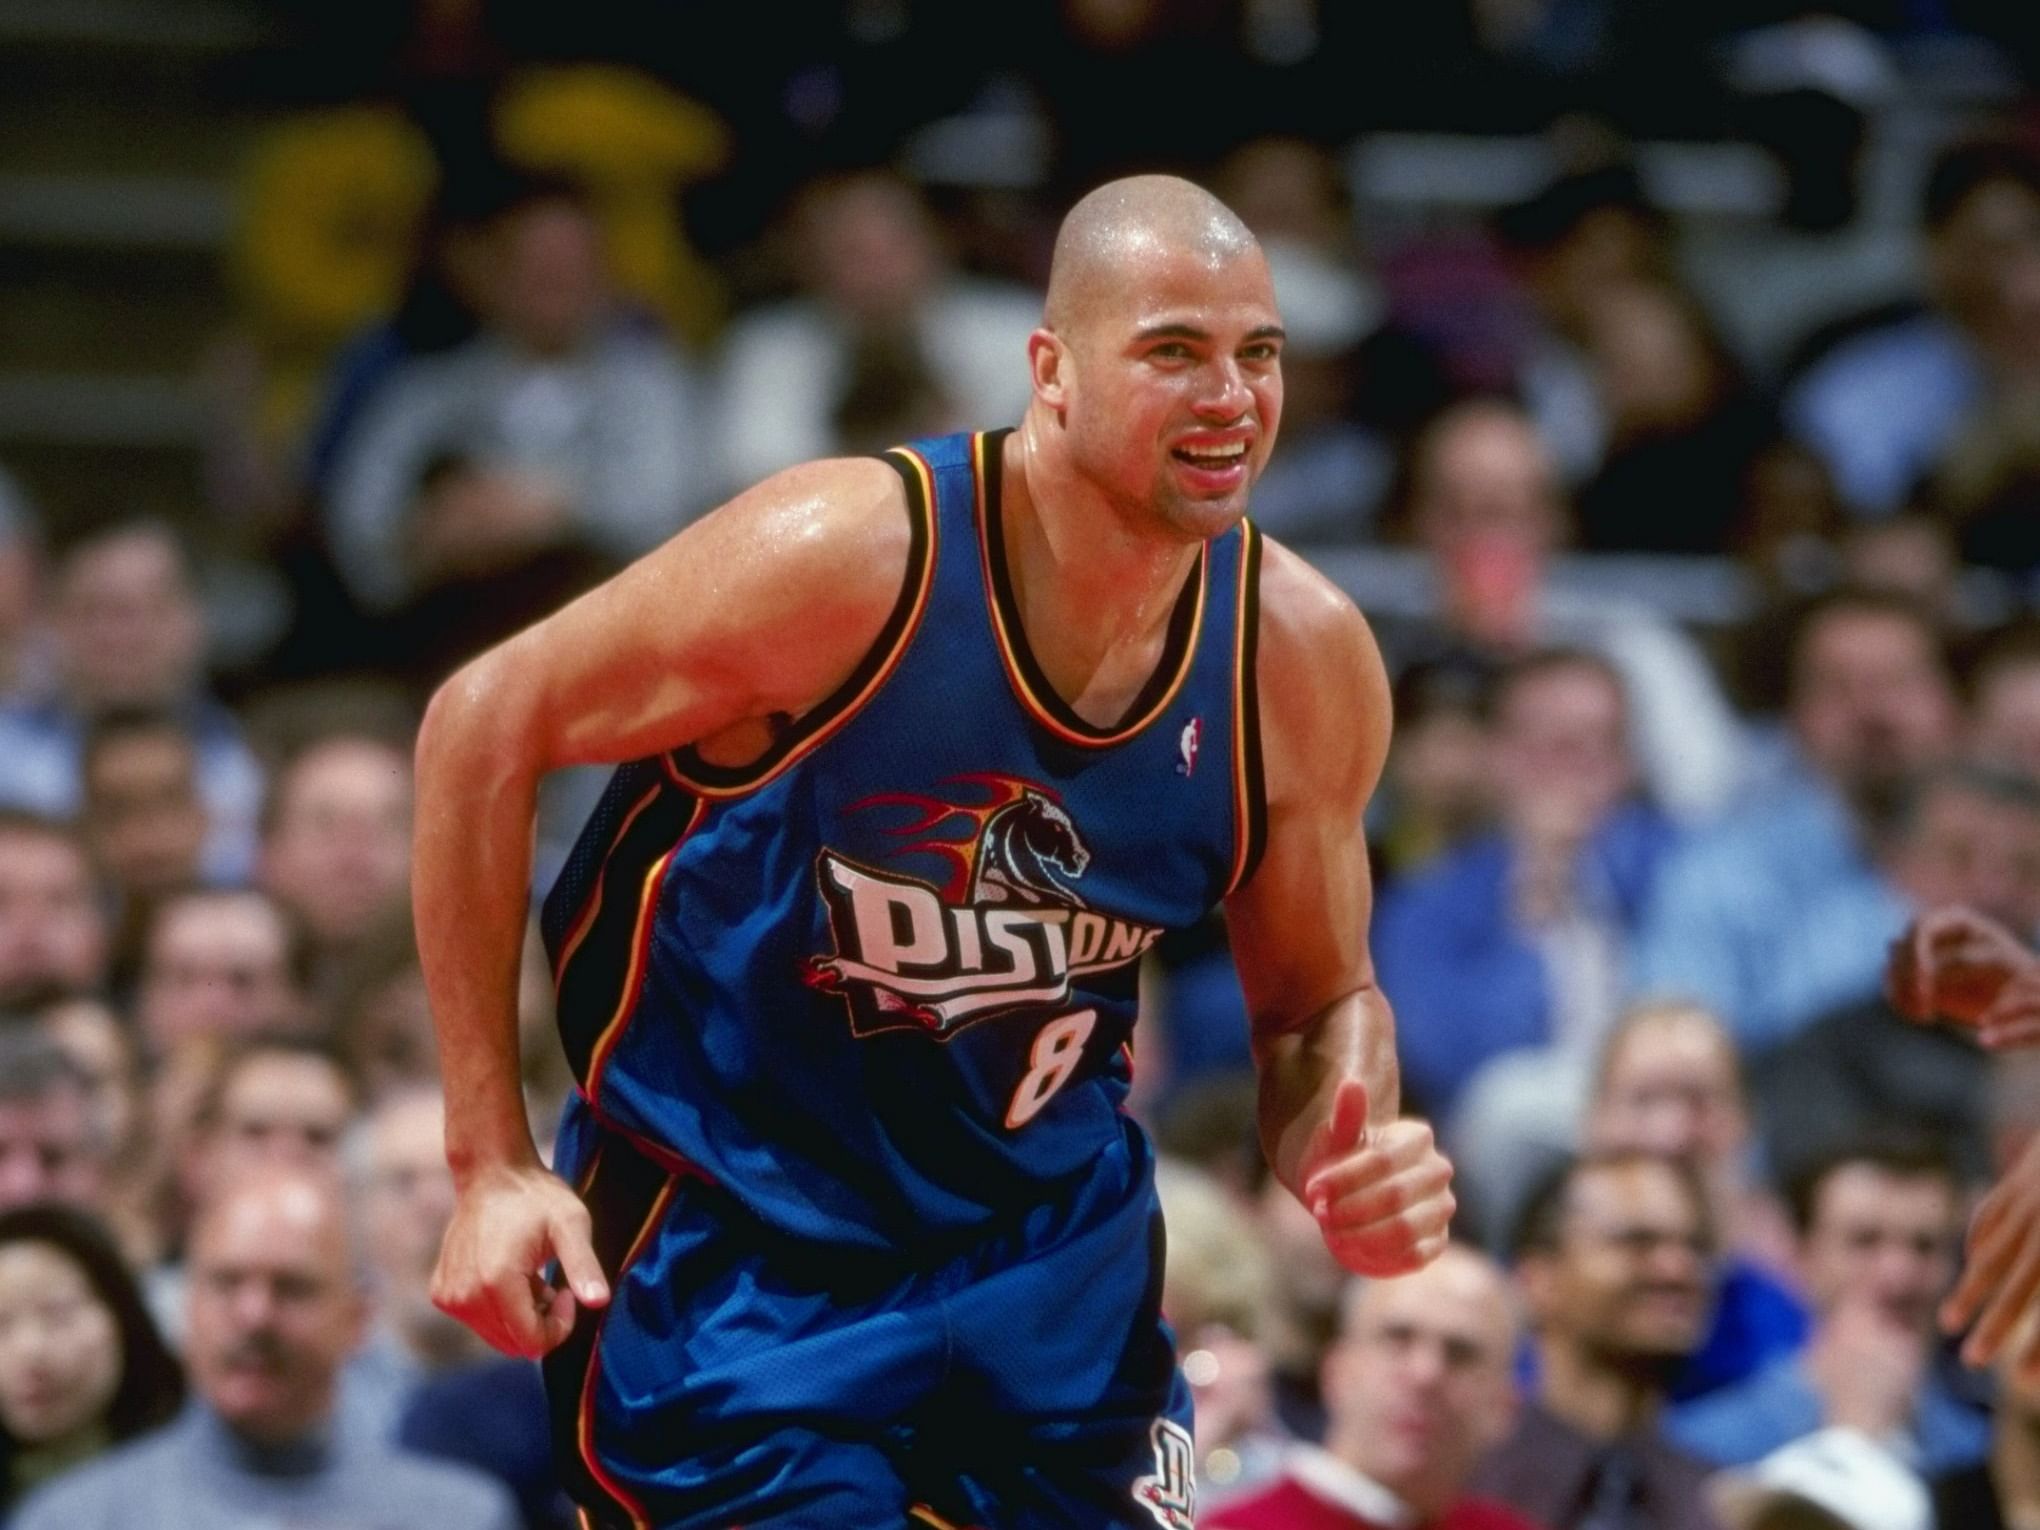 Bison Dele during his time with the Detroit Pistons